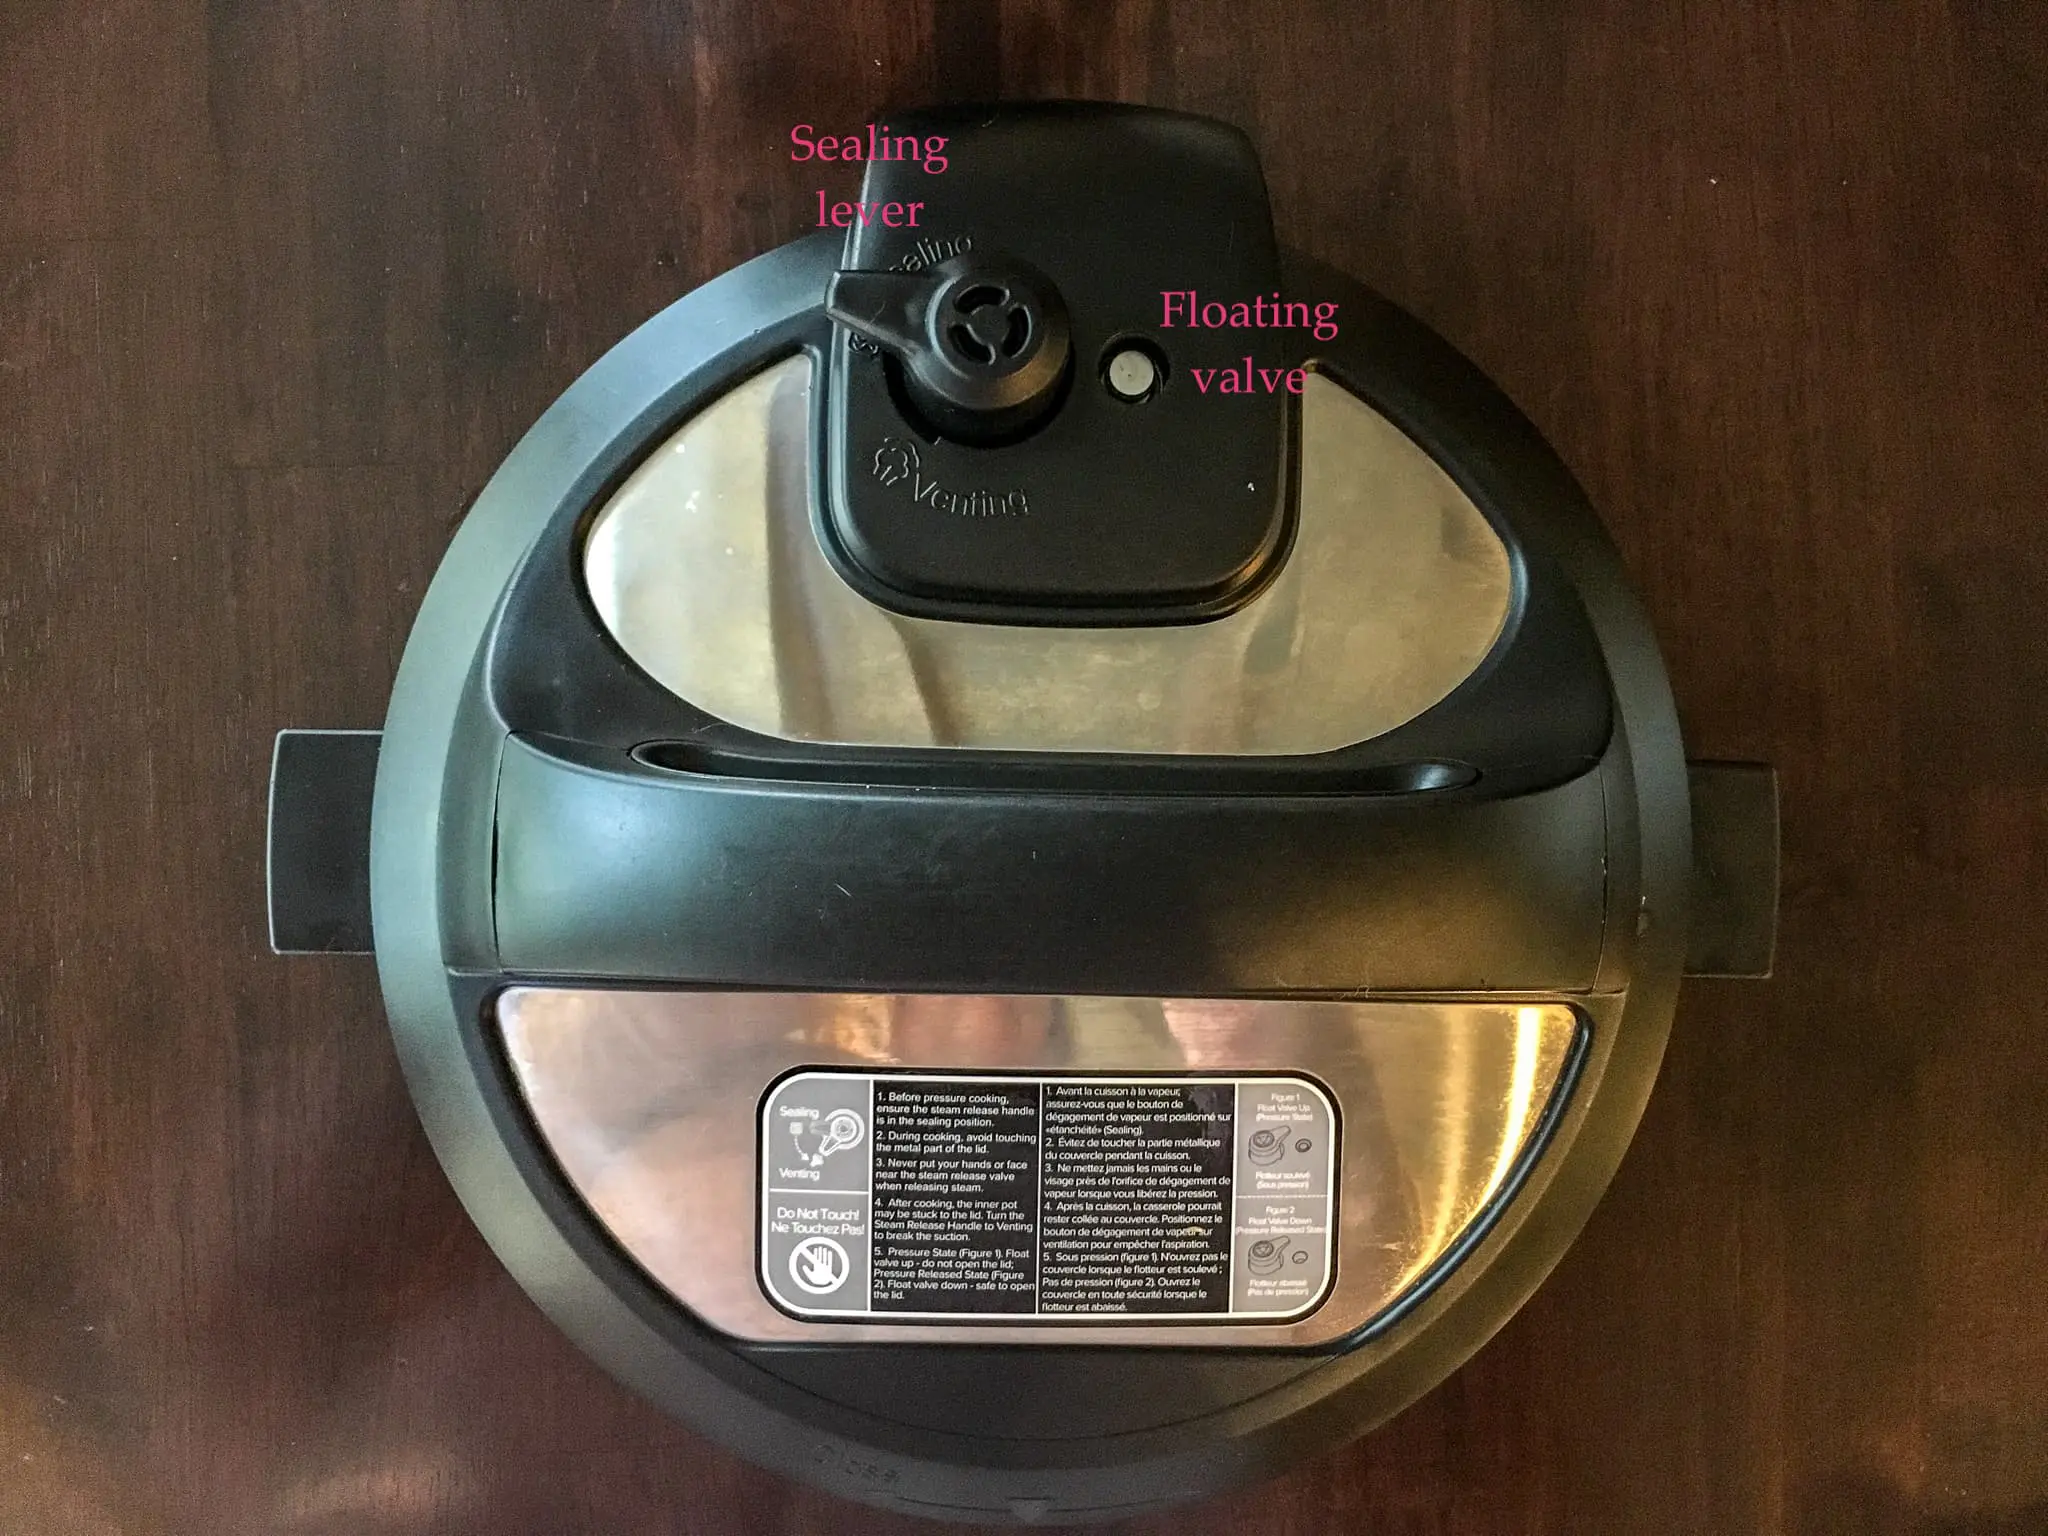 pressure cooking basics: the sealing lever and floating valve